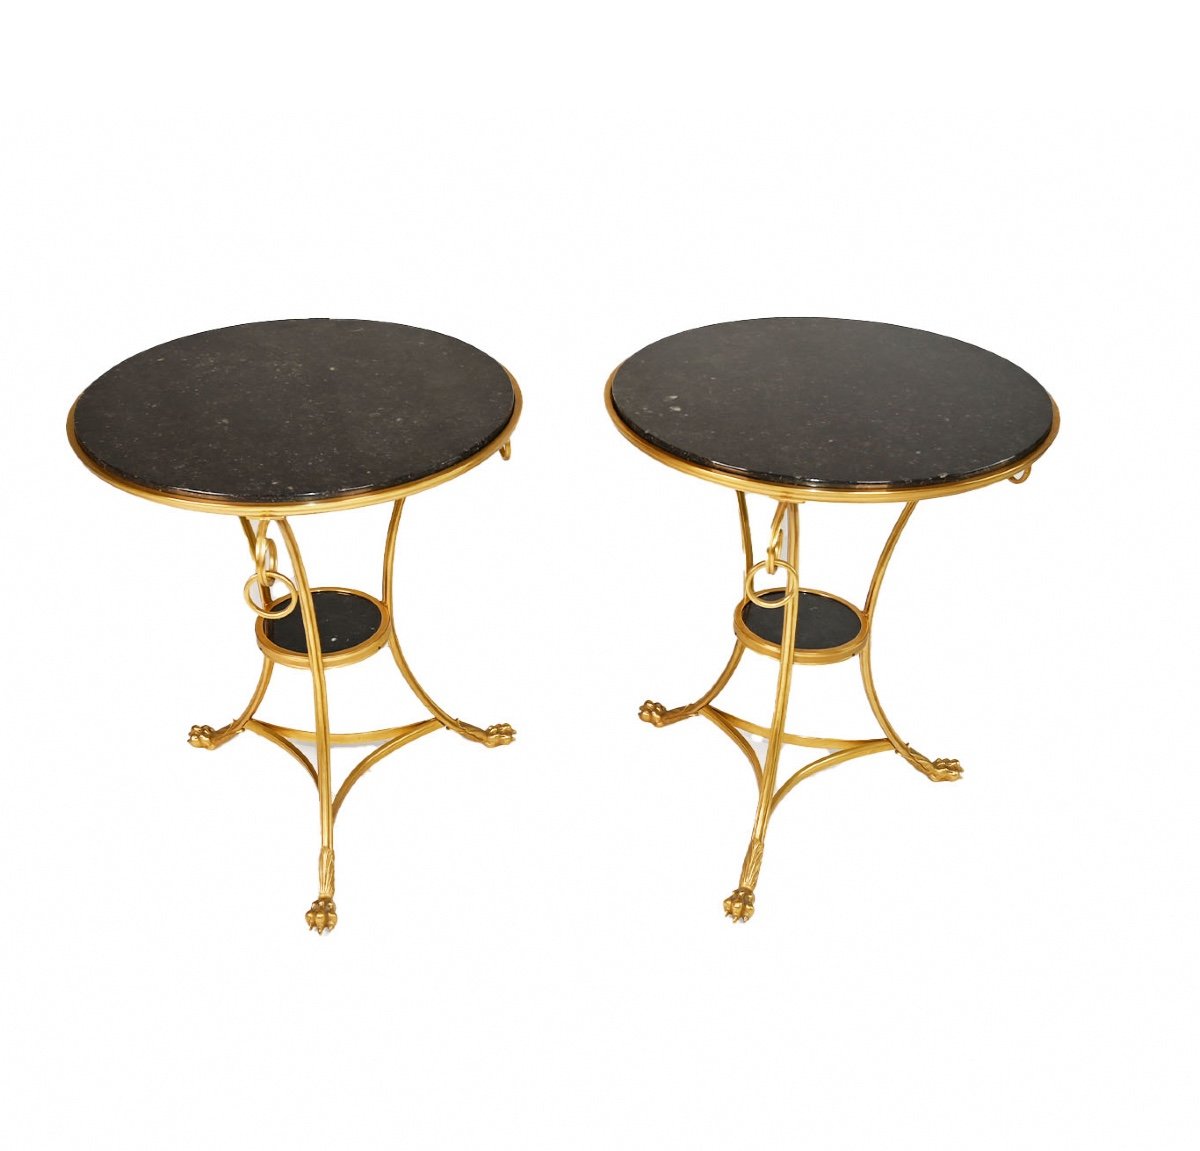 Pair Of Pedestal Tables In The Taste Of Maison Charles Bronze And Marble 